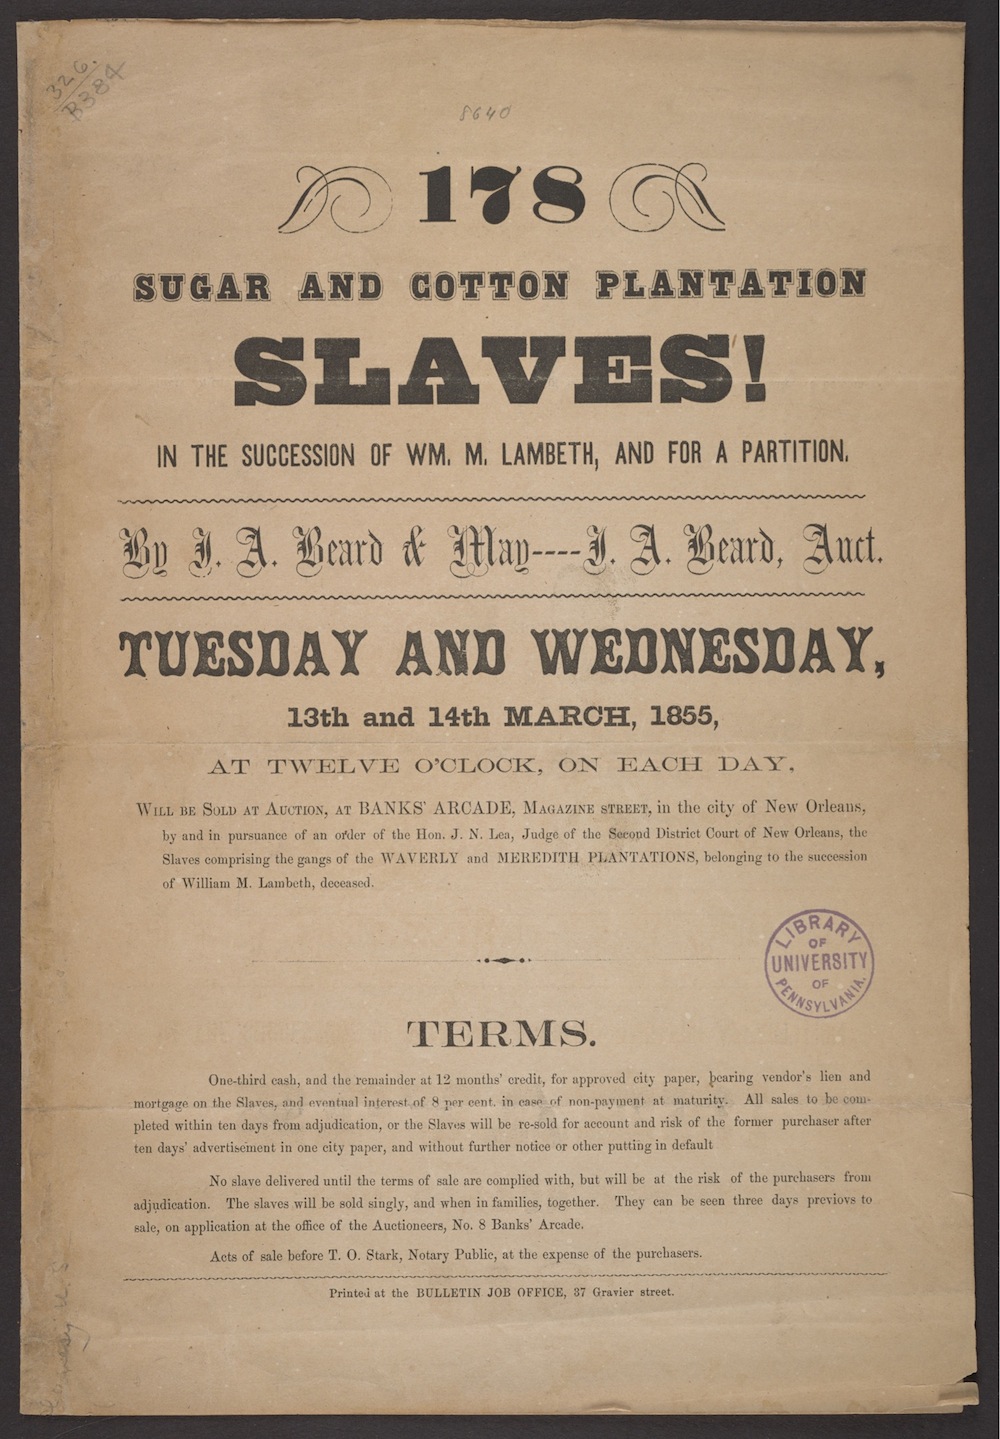 An 1855 pamphlet from J.A. Beard & May in New Orleans (University of Pennsylvania Libraries)